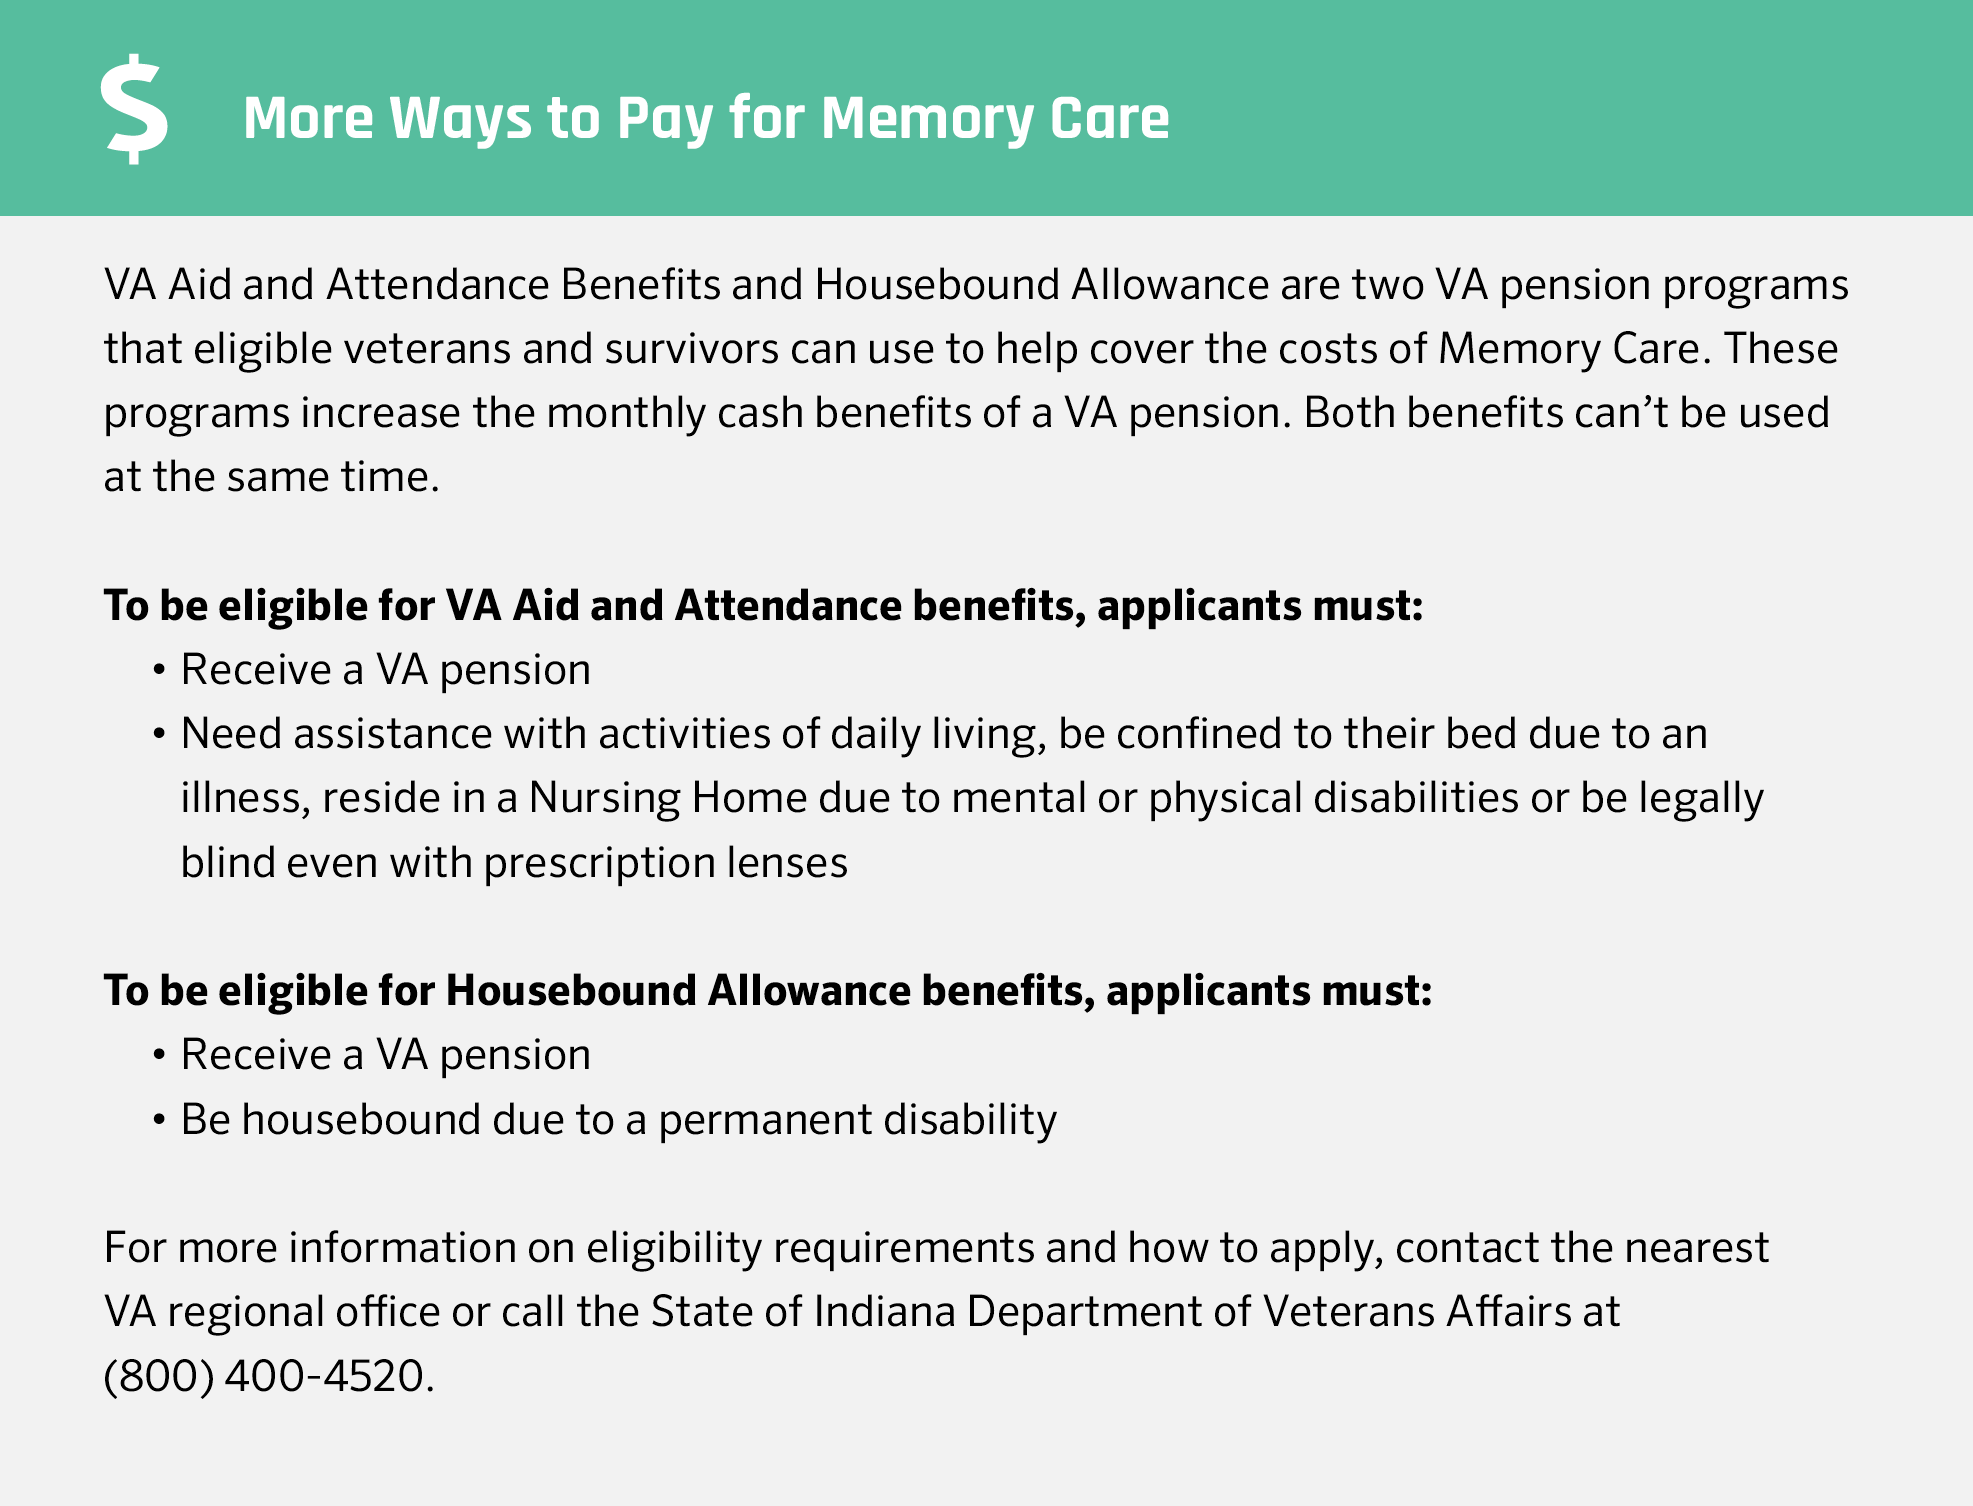 Memory care financial assistance in Indiana